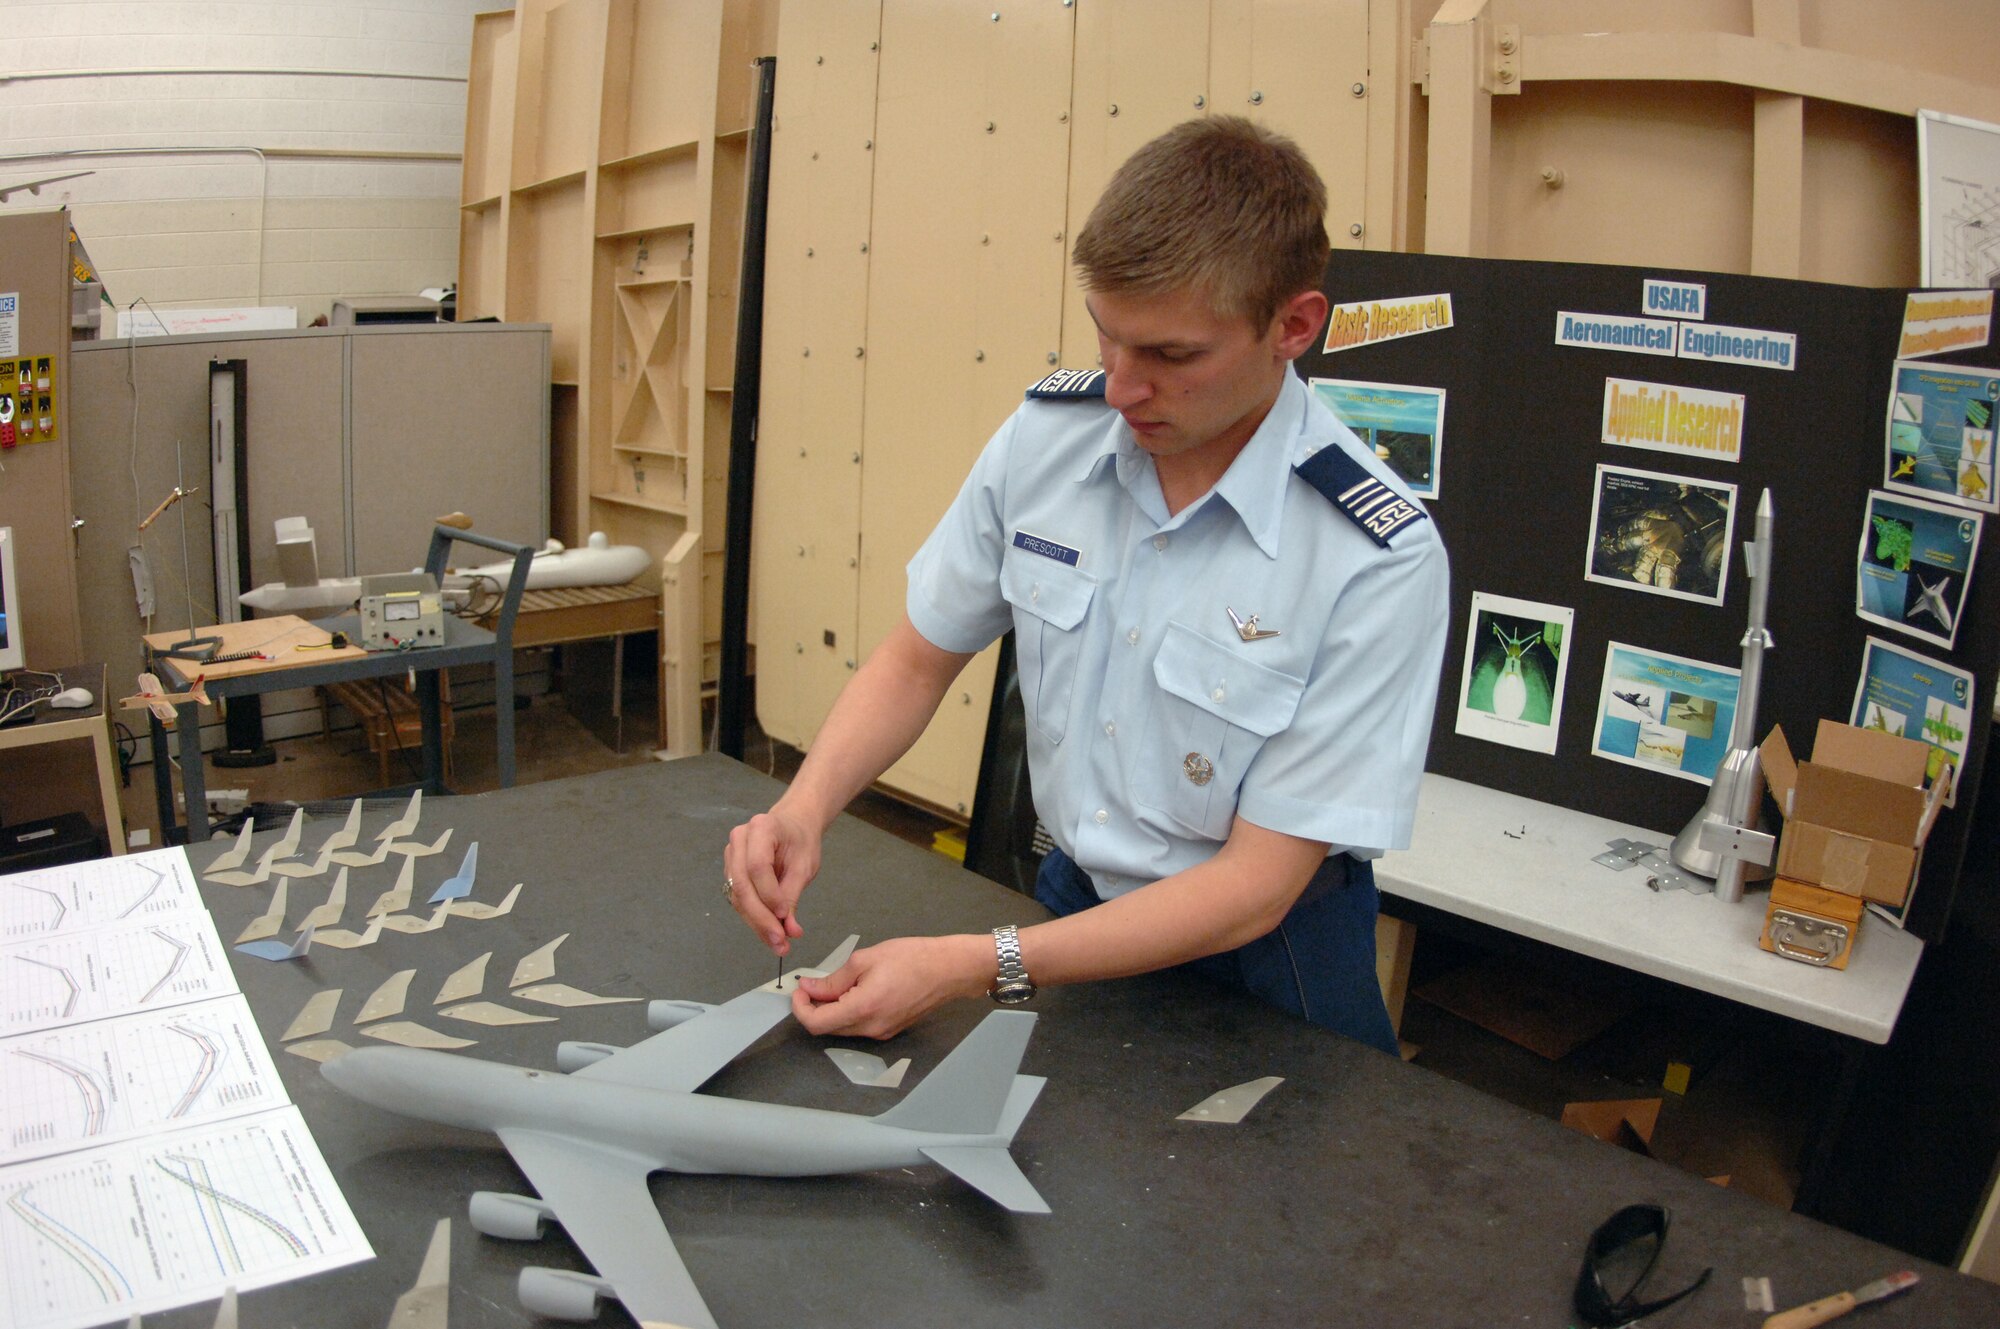 Cadet 1st Class Daniel Prescott affixes winglets to a model of a KC-135 Stratotanker in an aeronautical engineering lab at the U.S. Air Force Academy, Colo., Nov. 3, 2008. The department's research predicts an 8-percent improvement in fuel efficiency from the winglets, which reduce the effects of drag on the aircraft. (U.S. Air Force photo/John Van Winkle)